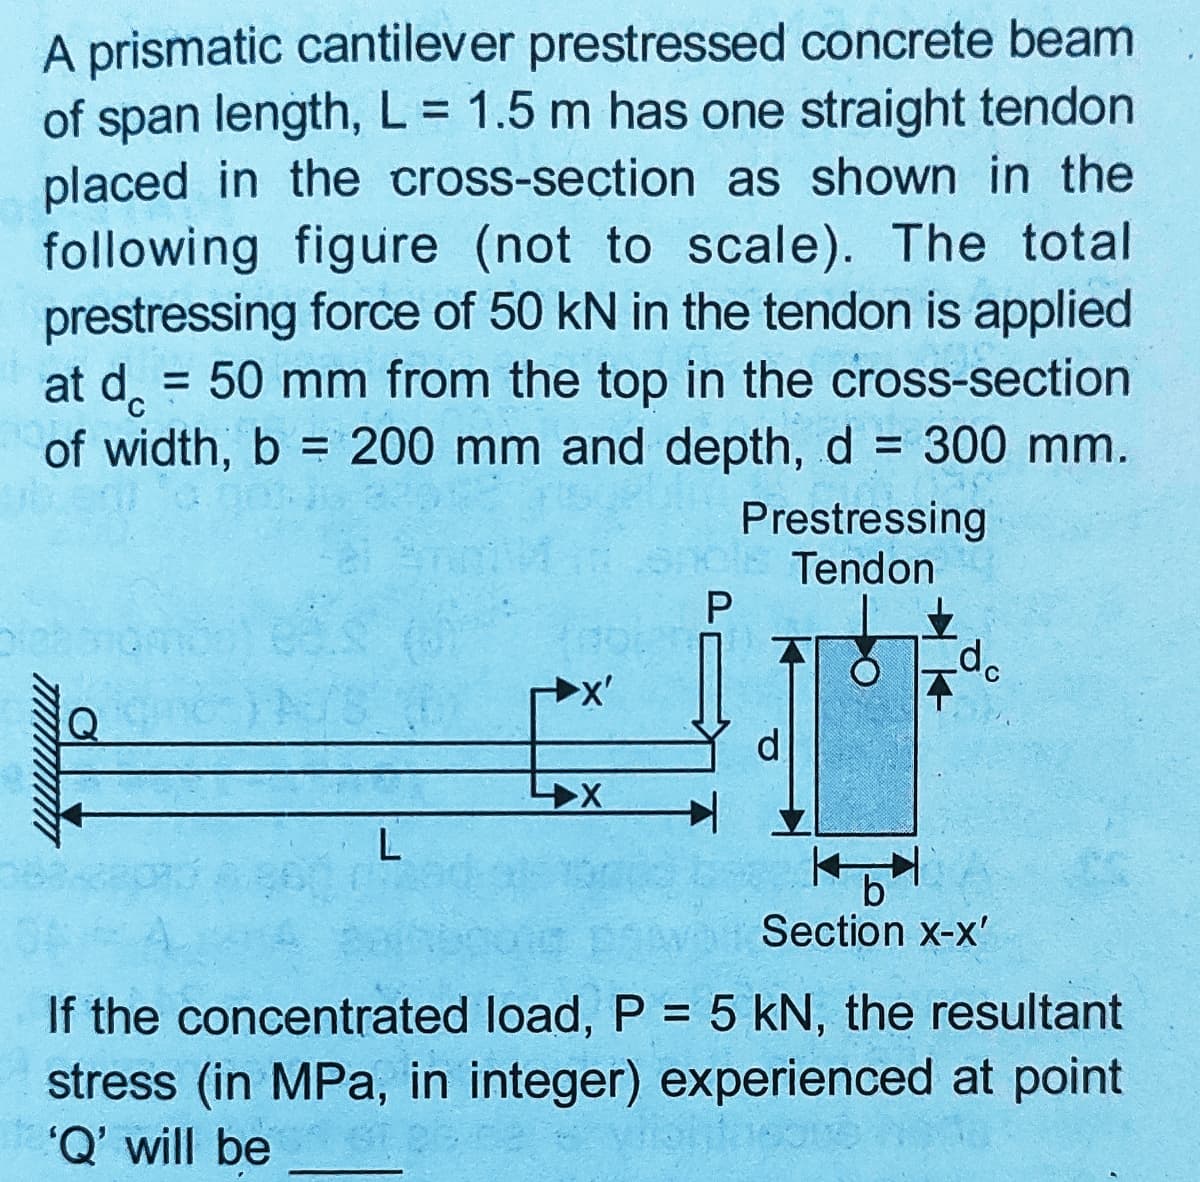 A prismatic cantilever prestressed concrete beam
of span length, L = 1.5 m has one straight tendon
placed in the cross-section as shown in the
following figure (not to scale). The total
prestressing force of 50 kN in the tendon is applied
at d. = 50 mm from the top in the cross-section
of width, b = 200 mm and depth, d = 300 mm.
%3D
%3D
%3D
%3D
Prestressing
Tendon
P
b
Section x-x'
If the concentrated load, P = 5 kN, the resultant
stress (in MPa, in integer) experienced at point
'Q' will be
%3D
